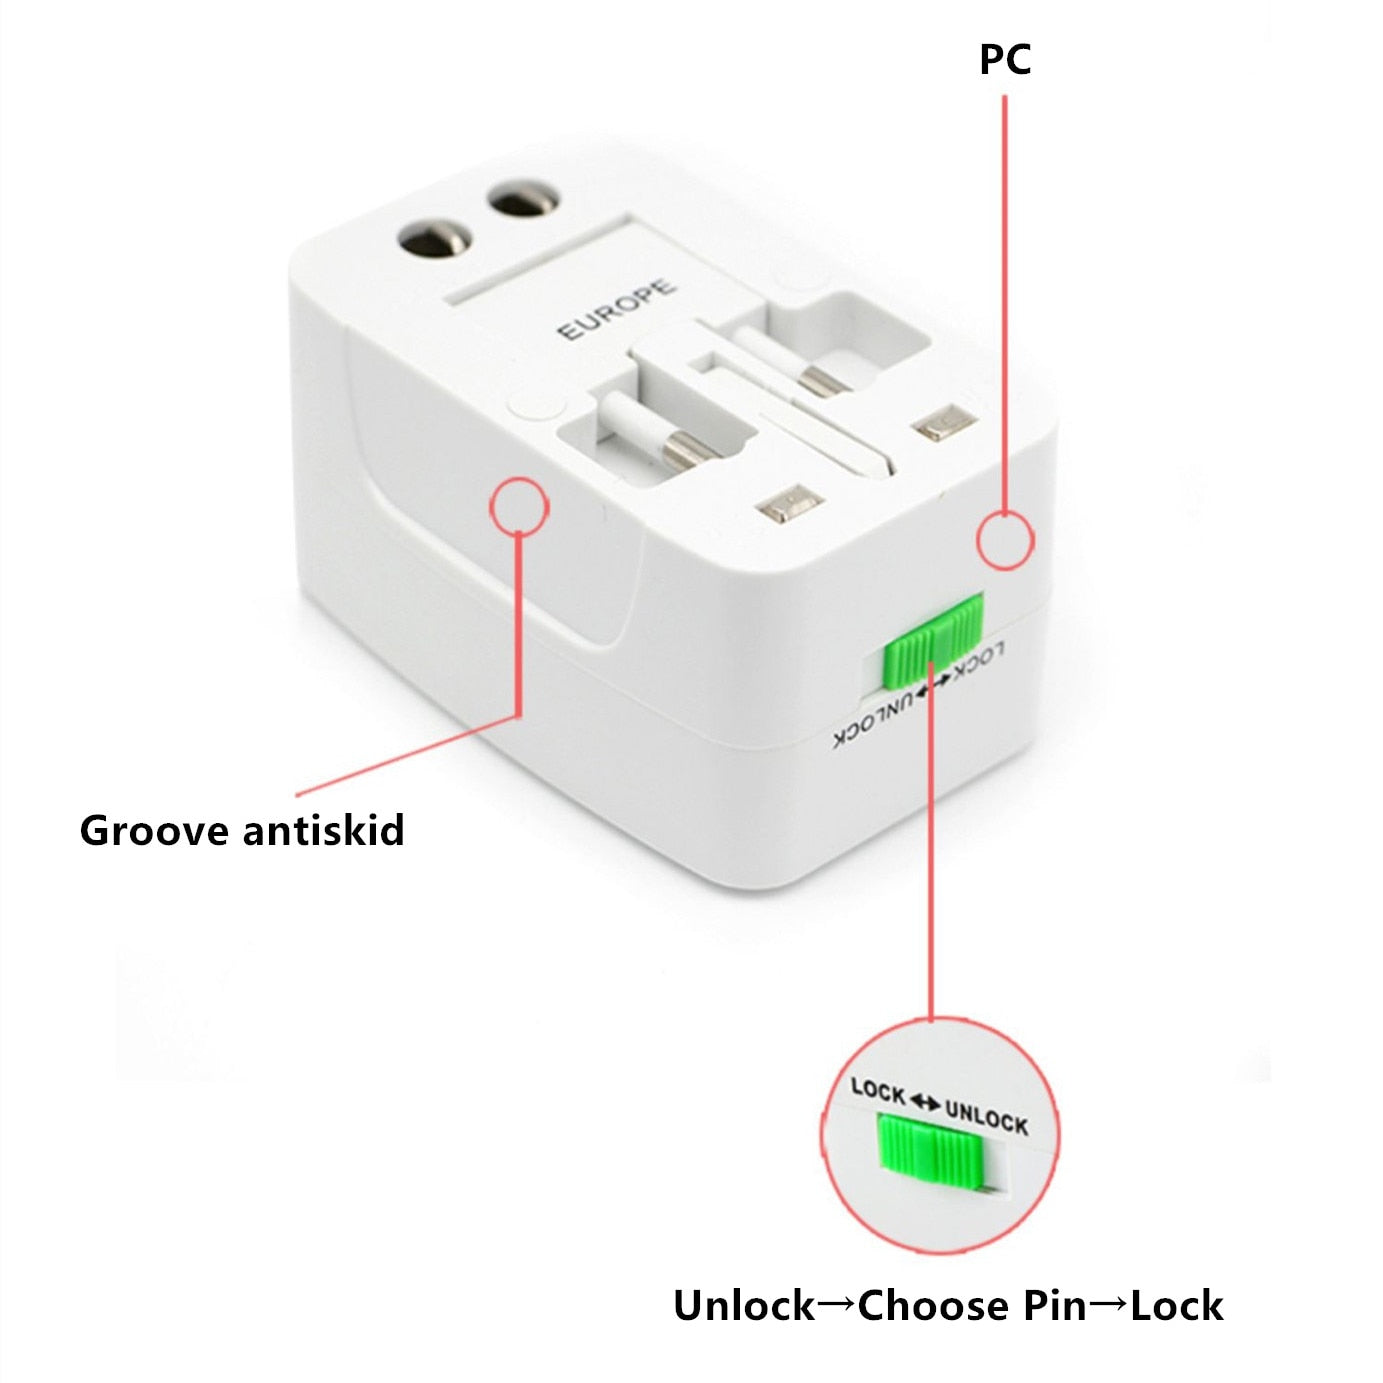 All in One Universal International Plug Adapter